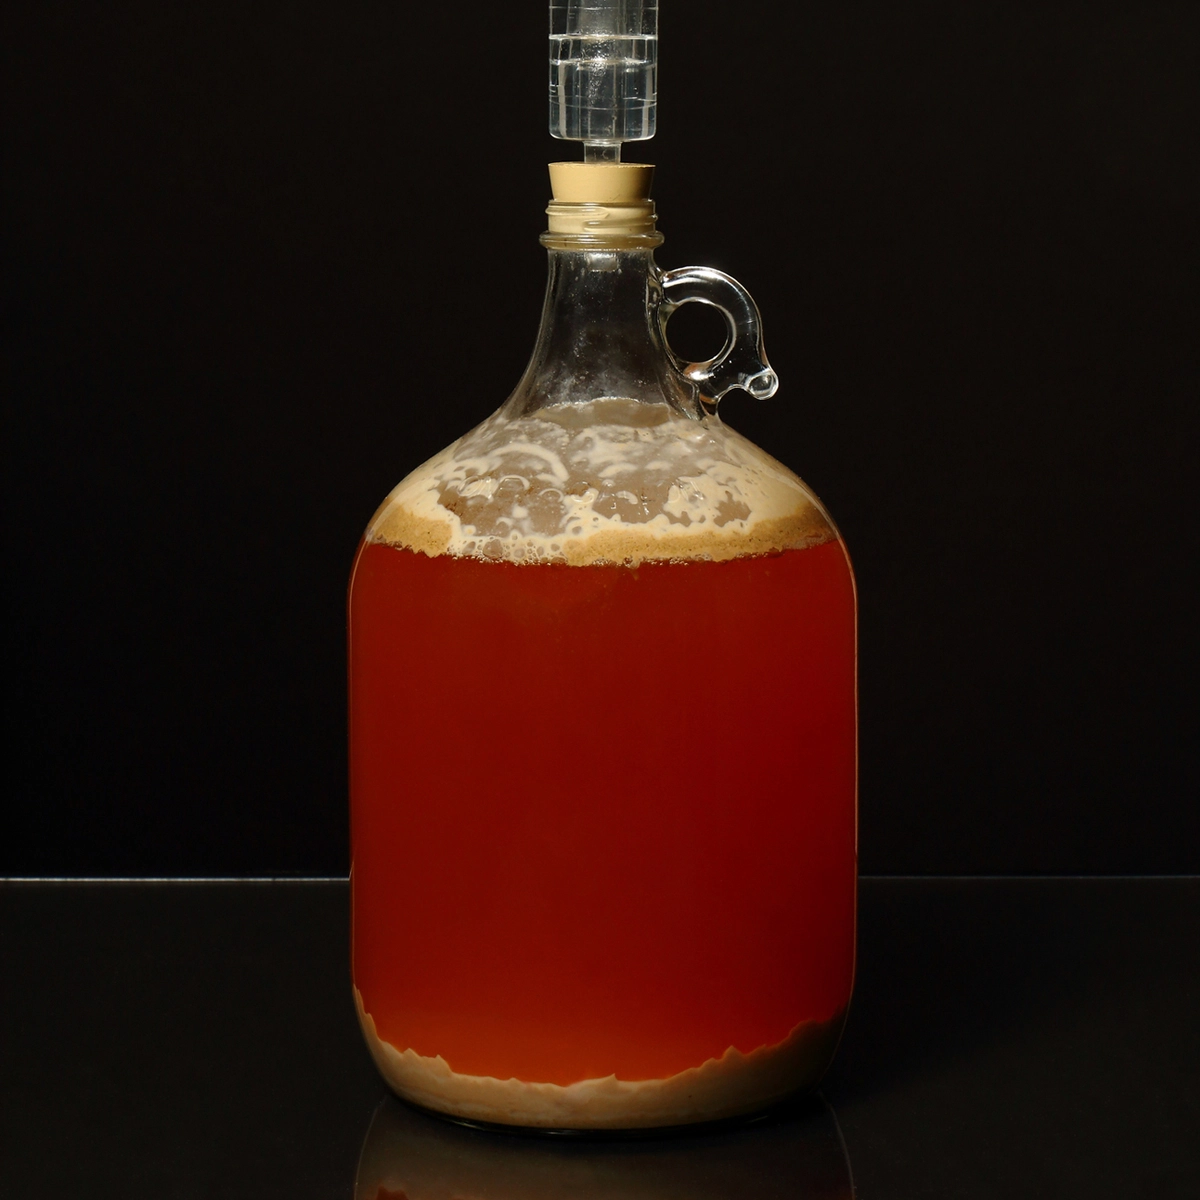 Sediment at the bottom of a carboy full of mead